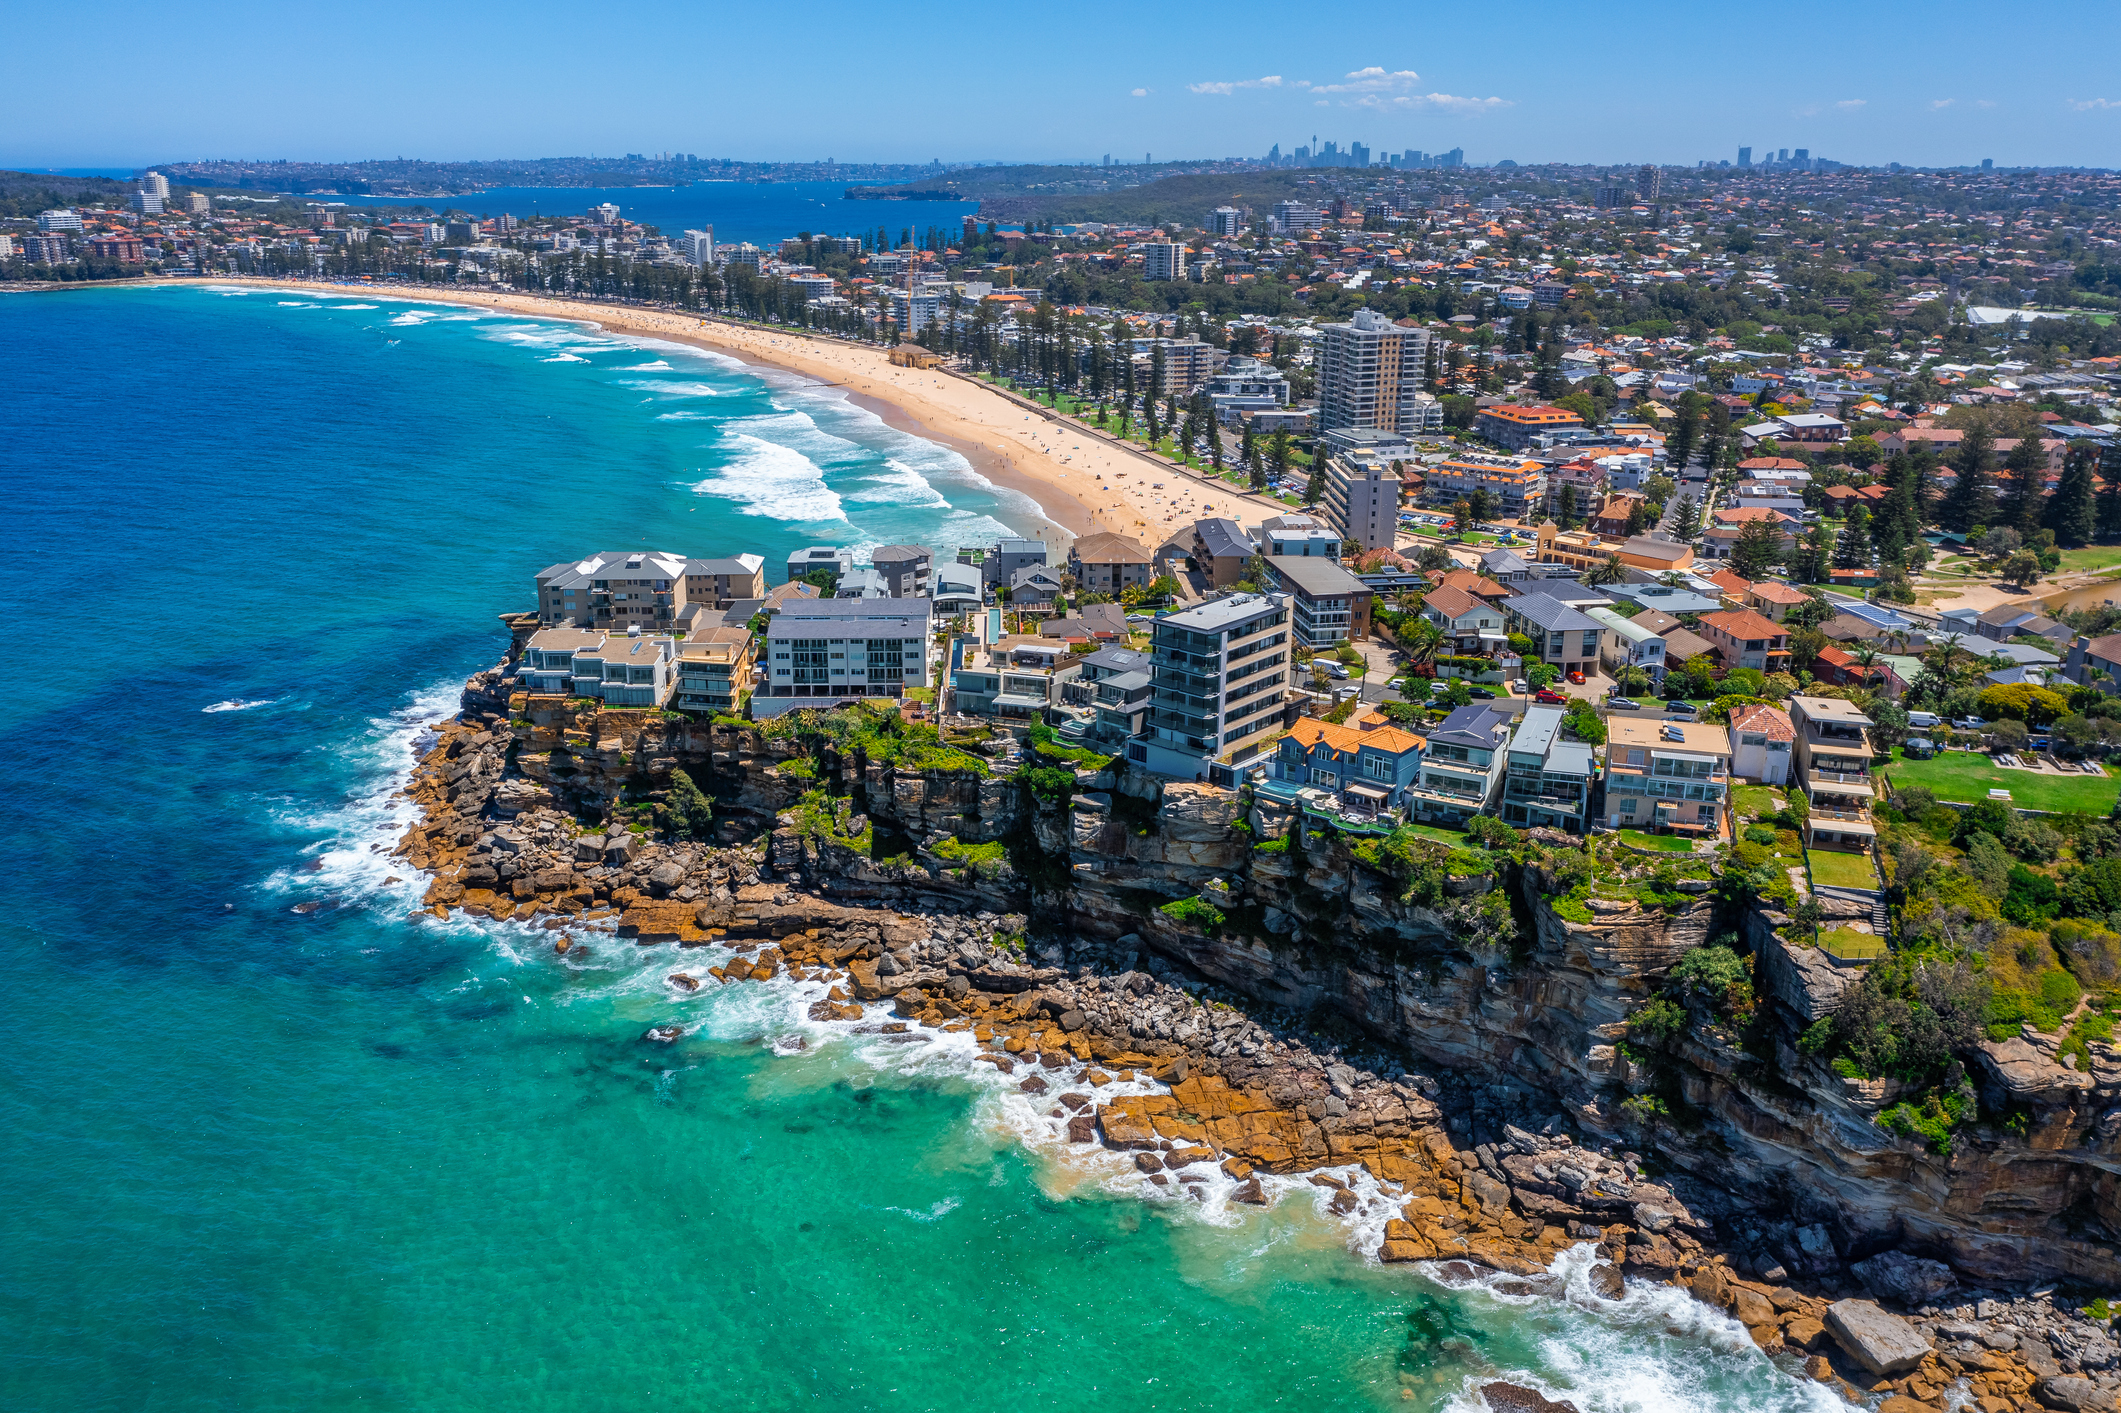 Drone aerial view over Queenscliff and Manly Northern Beaches